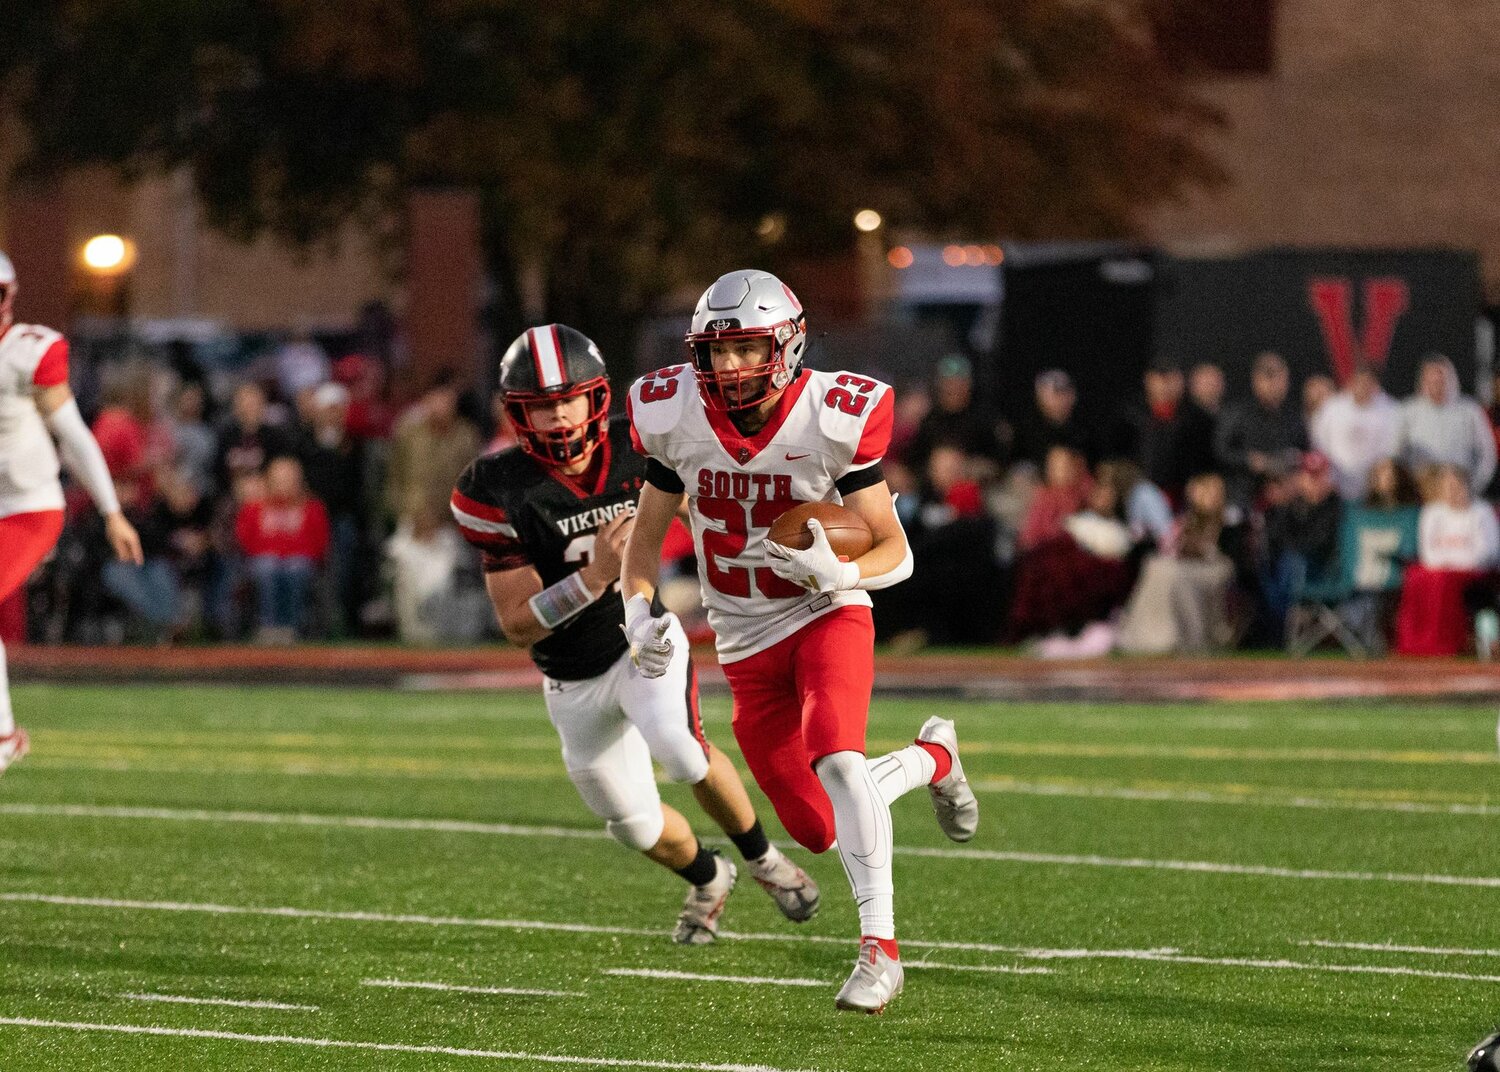 Cale Chadd will return next season and be one of the primary backs in the Southmont run game.